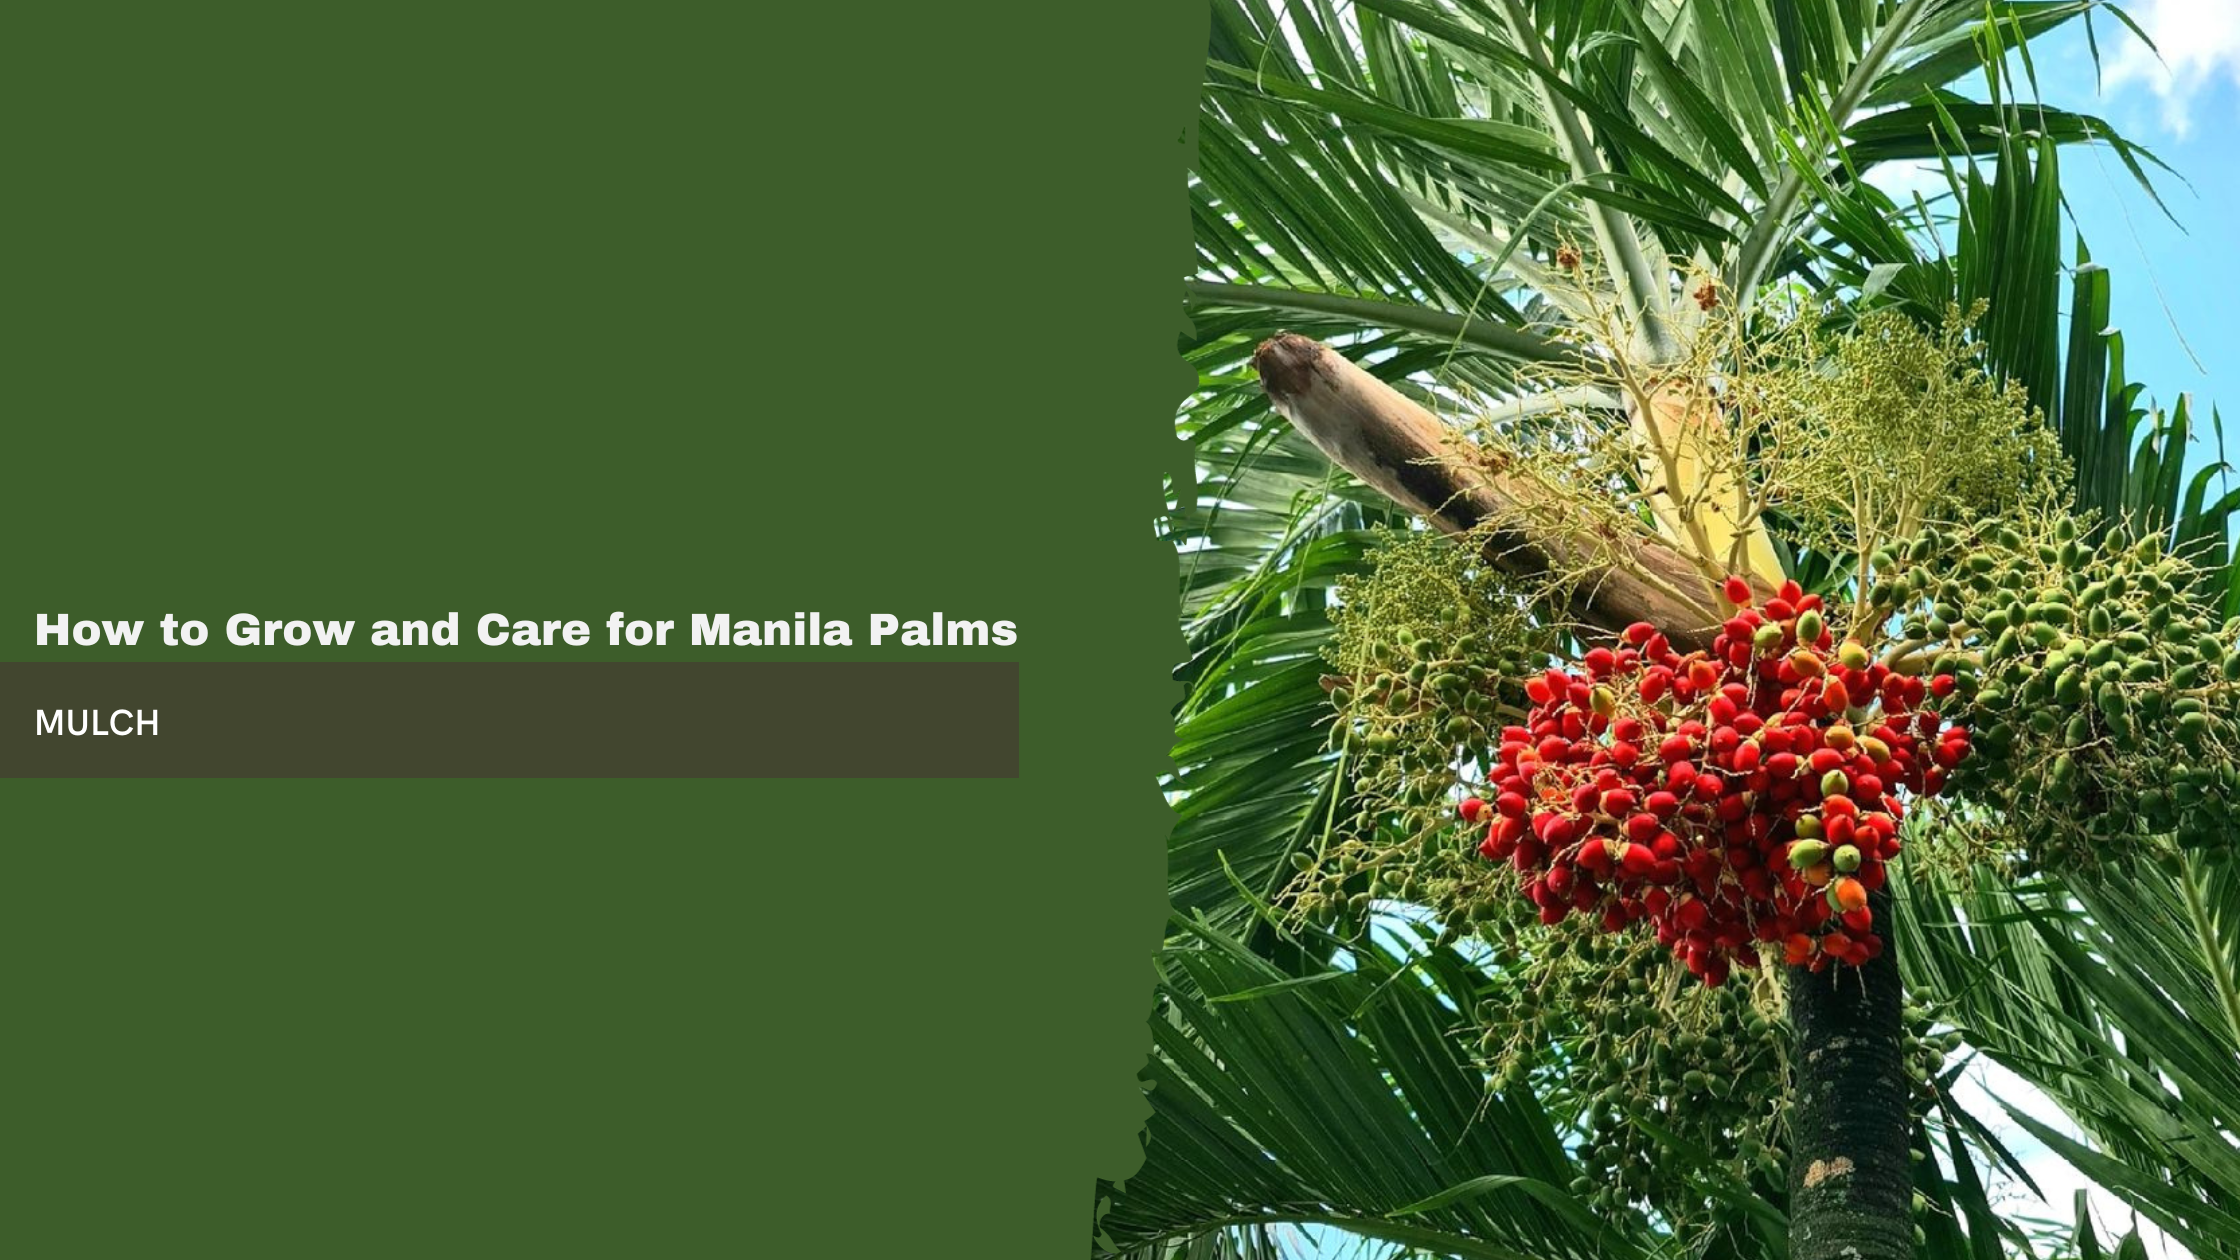 How to Grow and Care for Manila Palms